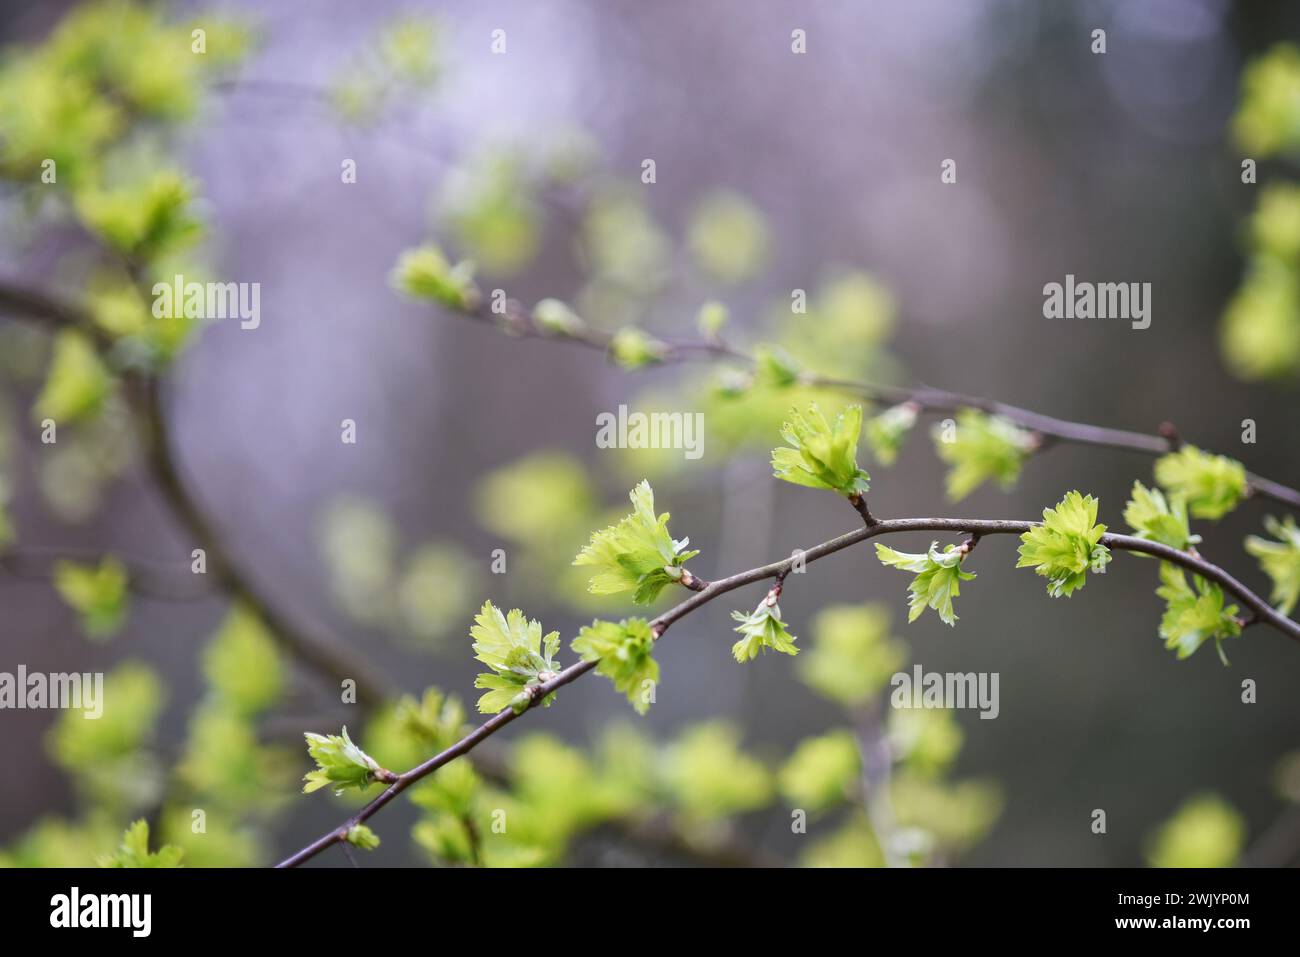 New leaves on a bush, photographed in spring on a blurred natural background, a symbol of a new life or new beginnings. Stock Photo